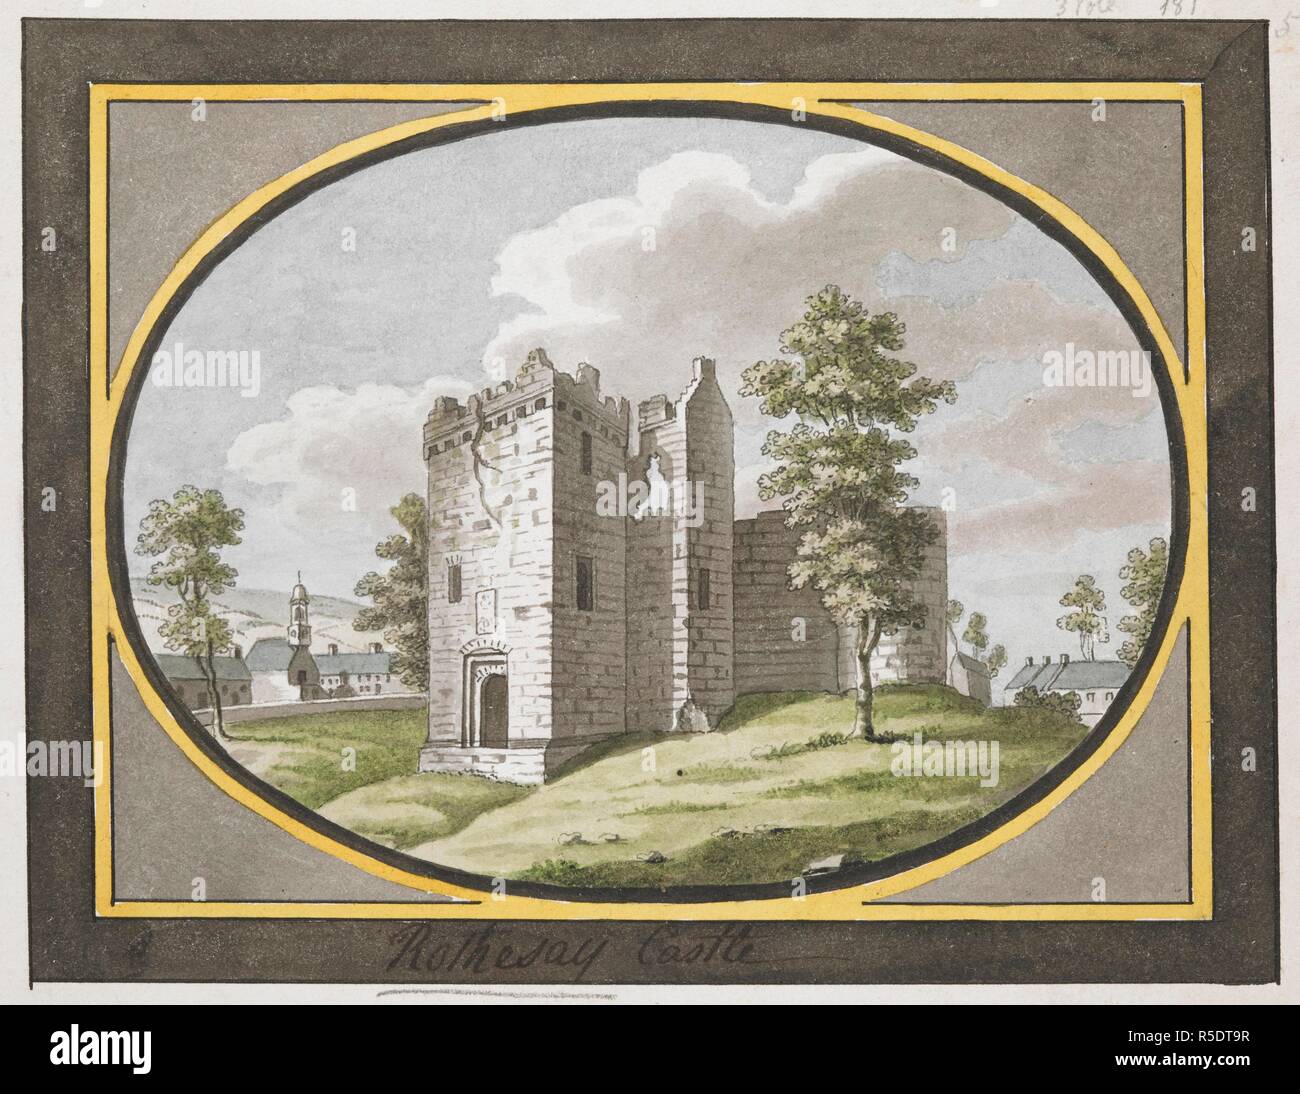 A view of Rothesay Castle. A colored view of Rothesay Castle. ca. 1750-1800. Source: Maps K.Top.49.47.1. Language: English. Stock Photo